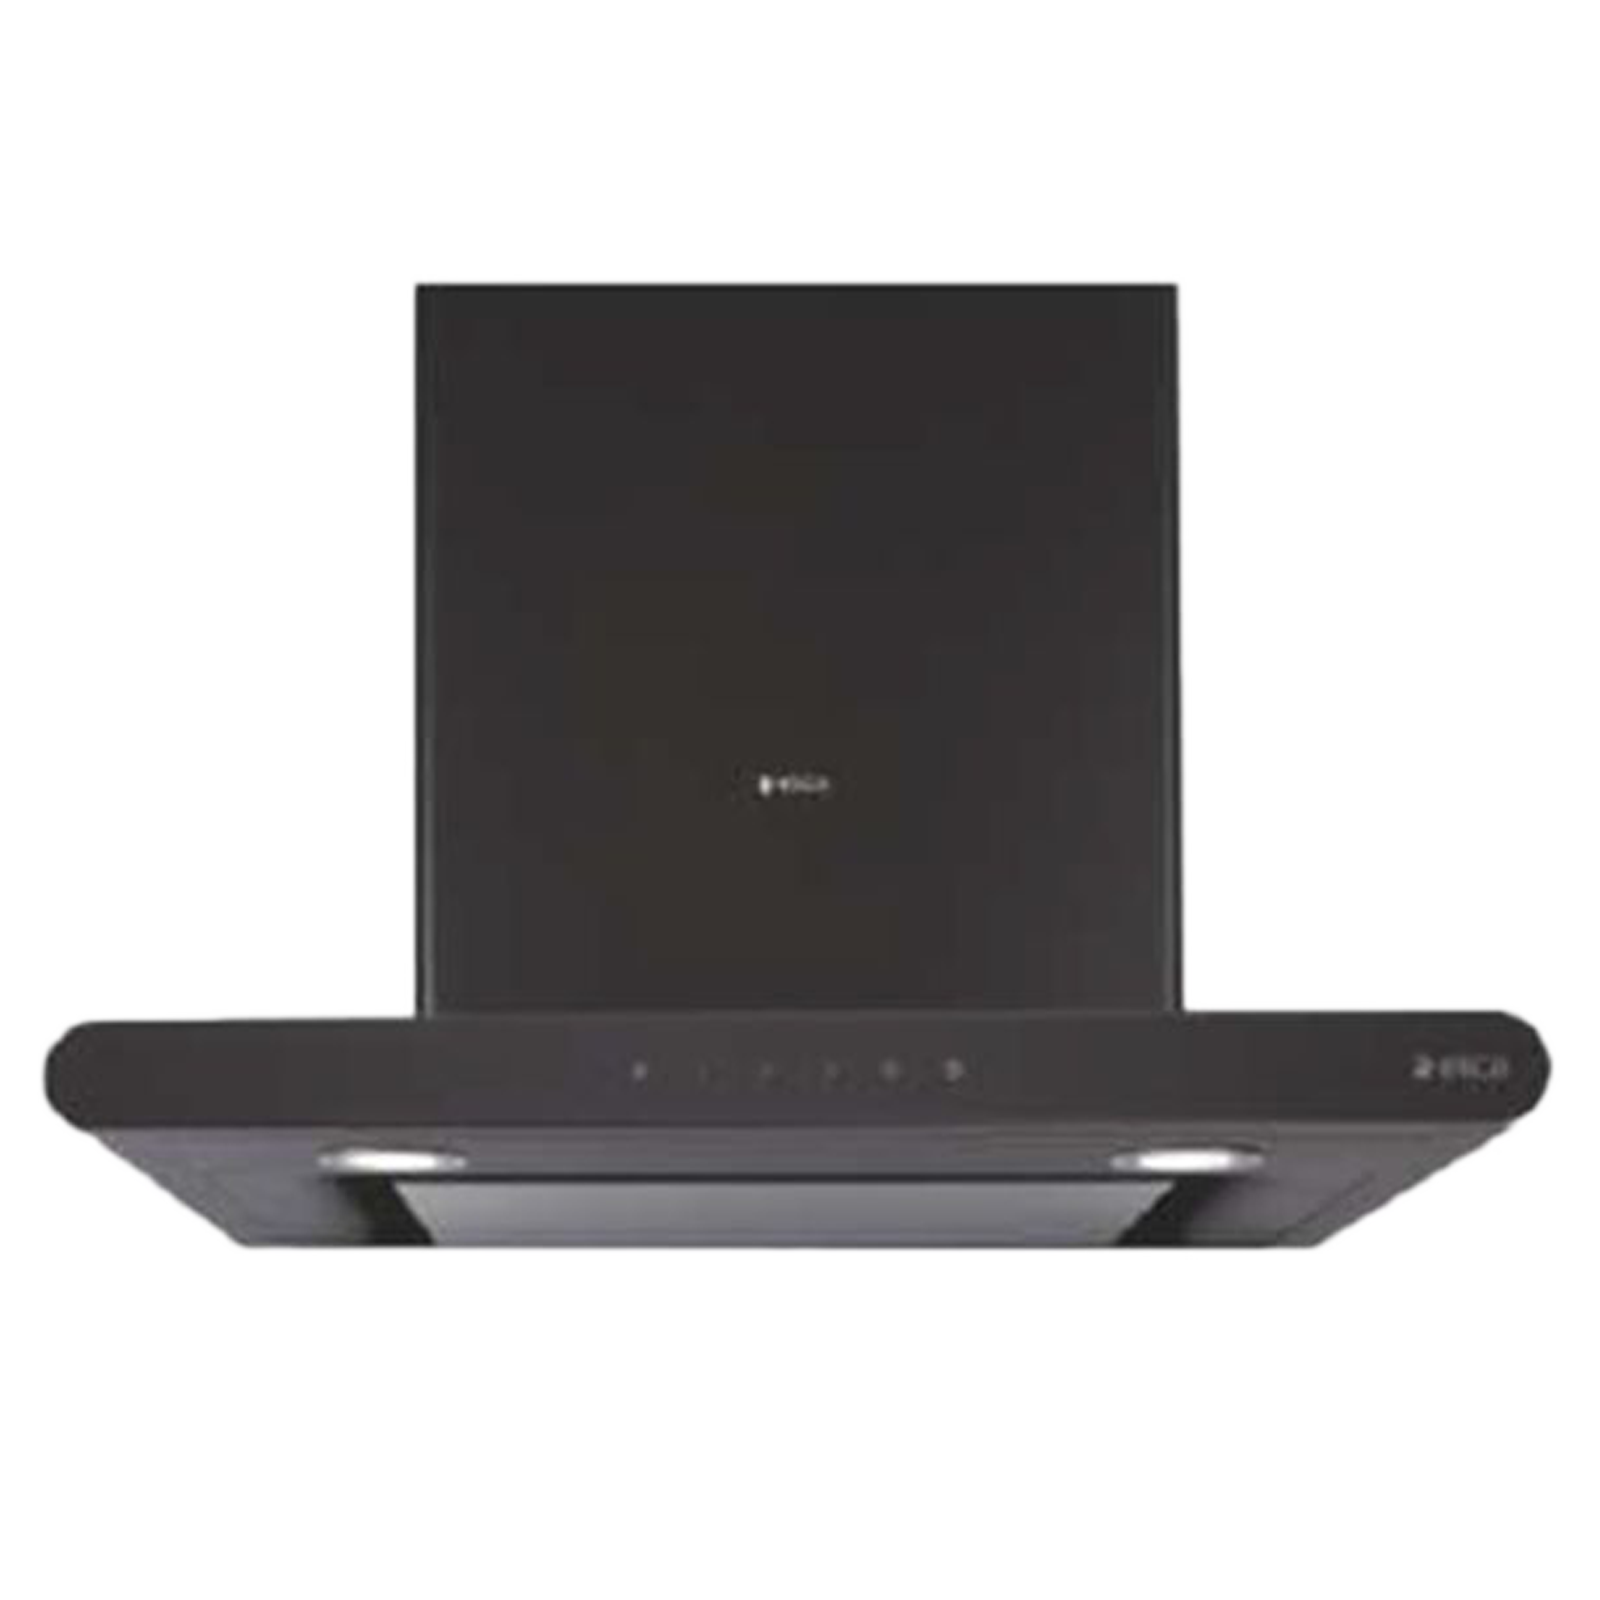 Elica Galaxy EDS HE 1010 m³/hr 60cm Wall Mount Chimney (Round EDS Filter, 2859, Black Body With Black Glass)_1